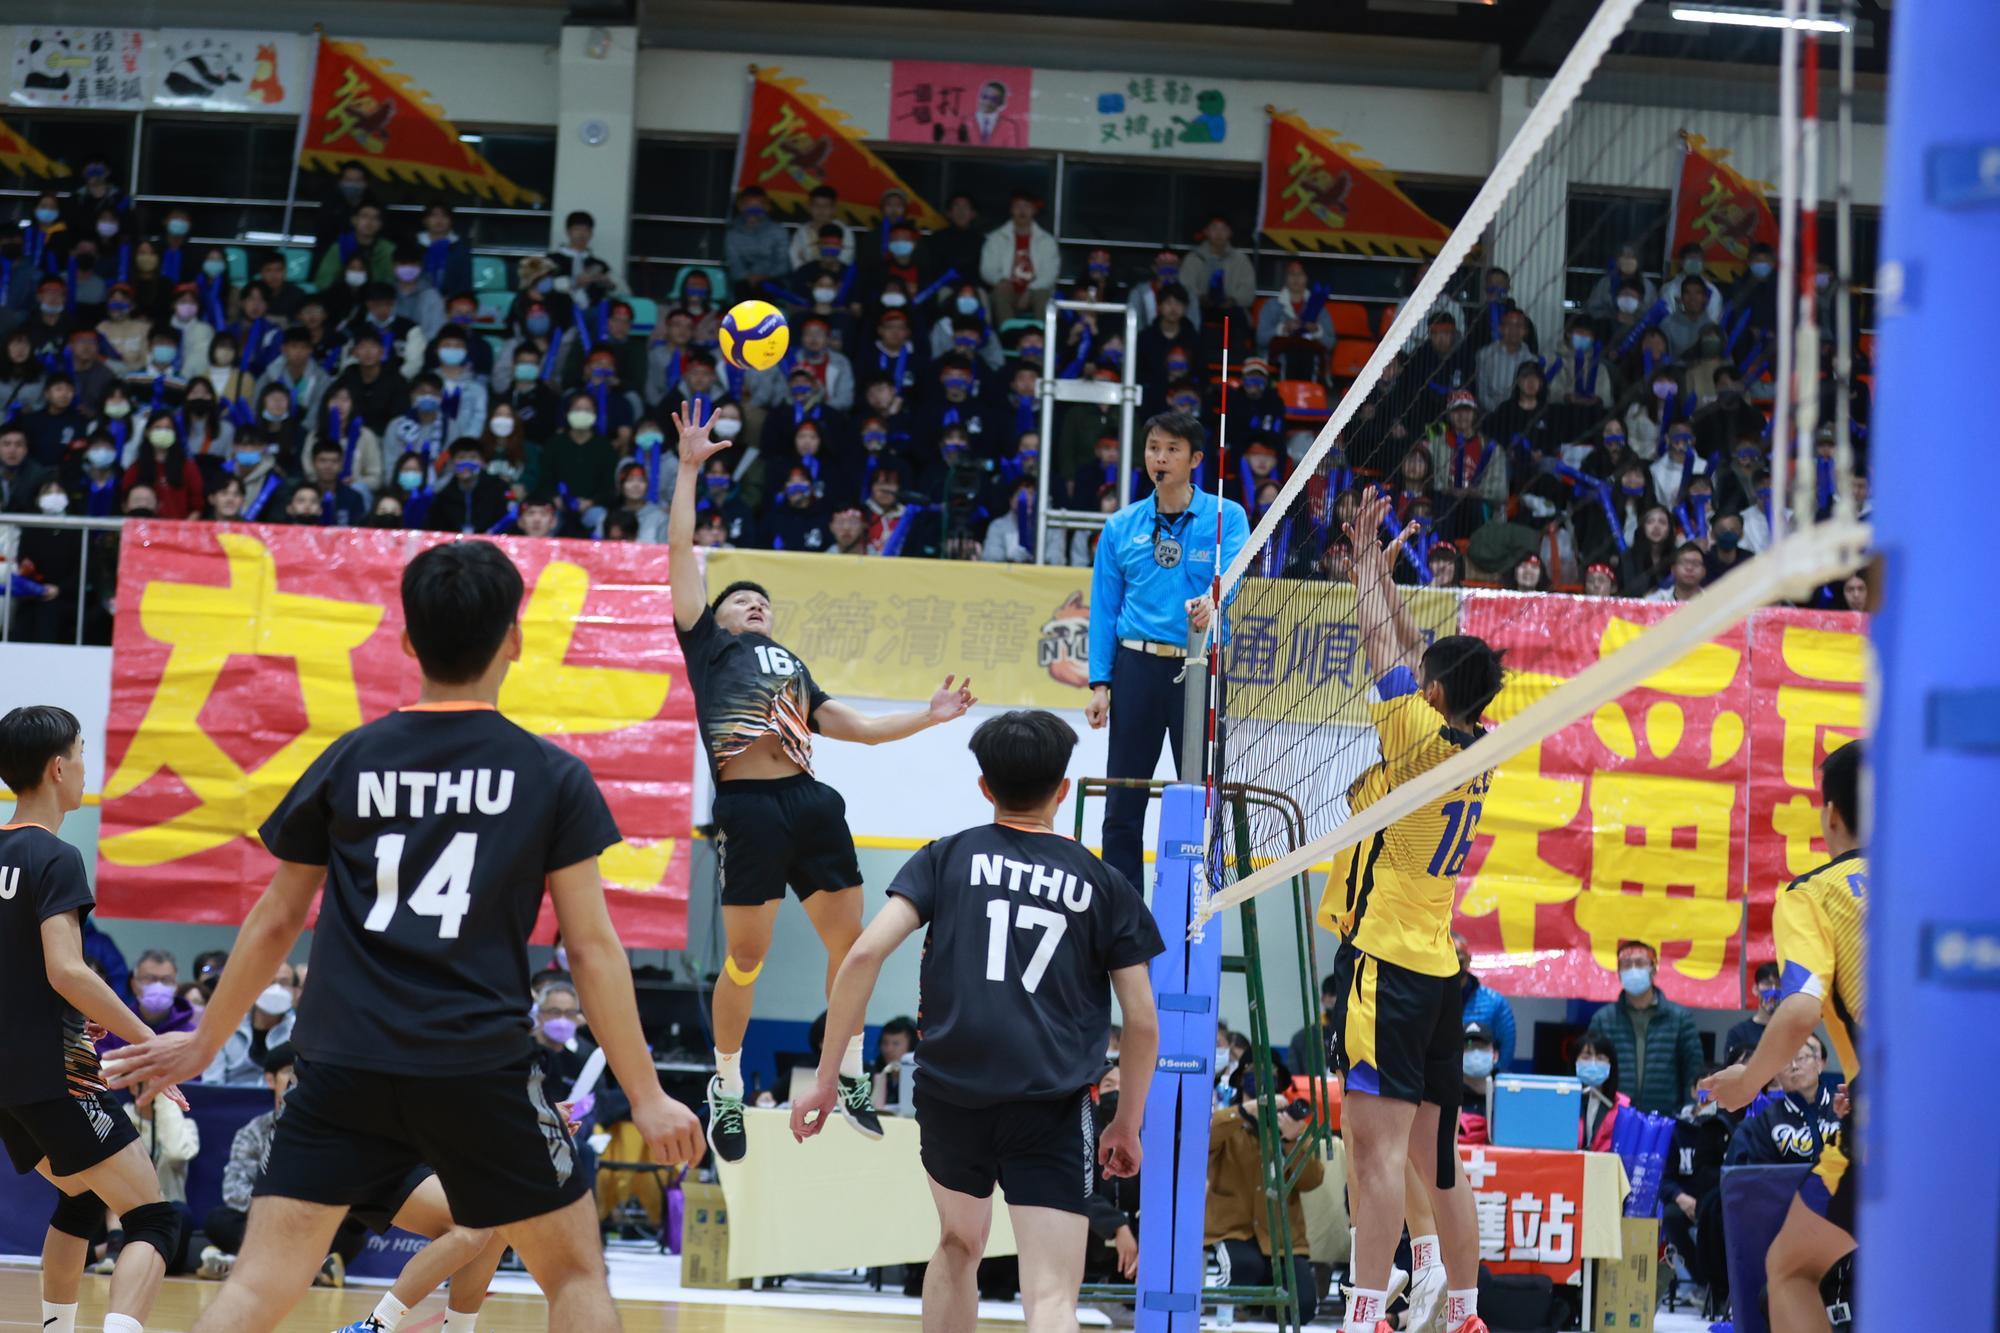 NTHU server Chen,Hao-wei in action on the volleyball court.